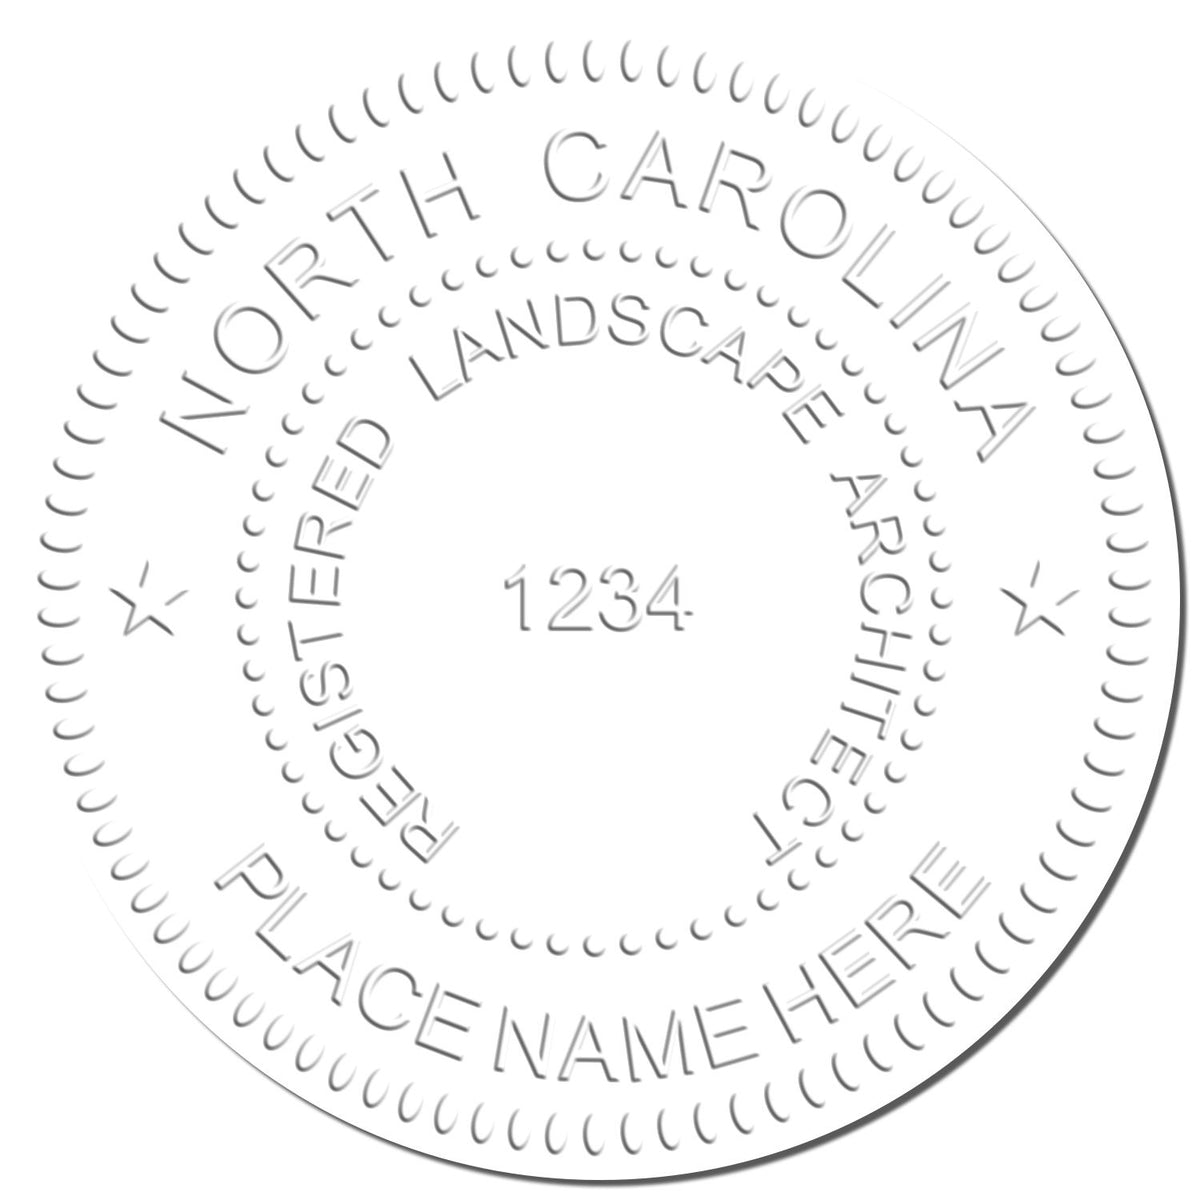 This paper is stamped with a sample imprint of the Soft Pocket North Carolina Landscape Architect Embosser, signifying its quality and reliability.